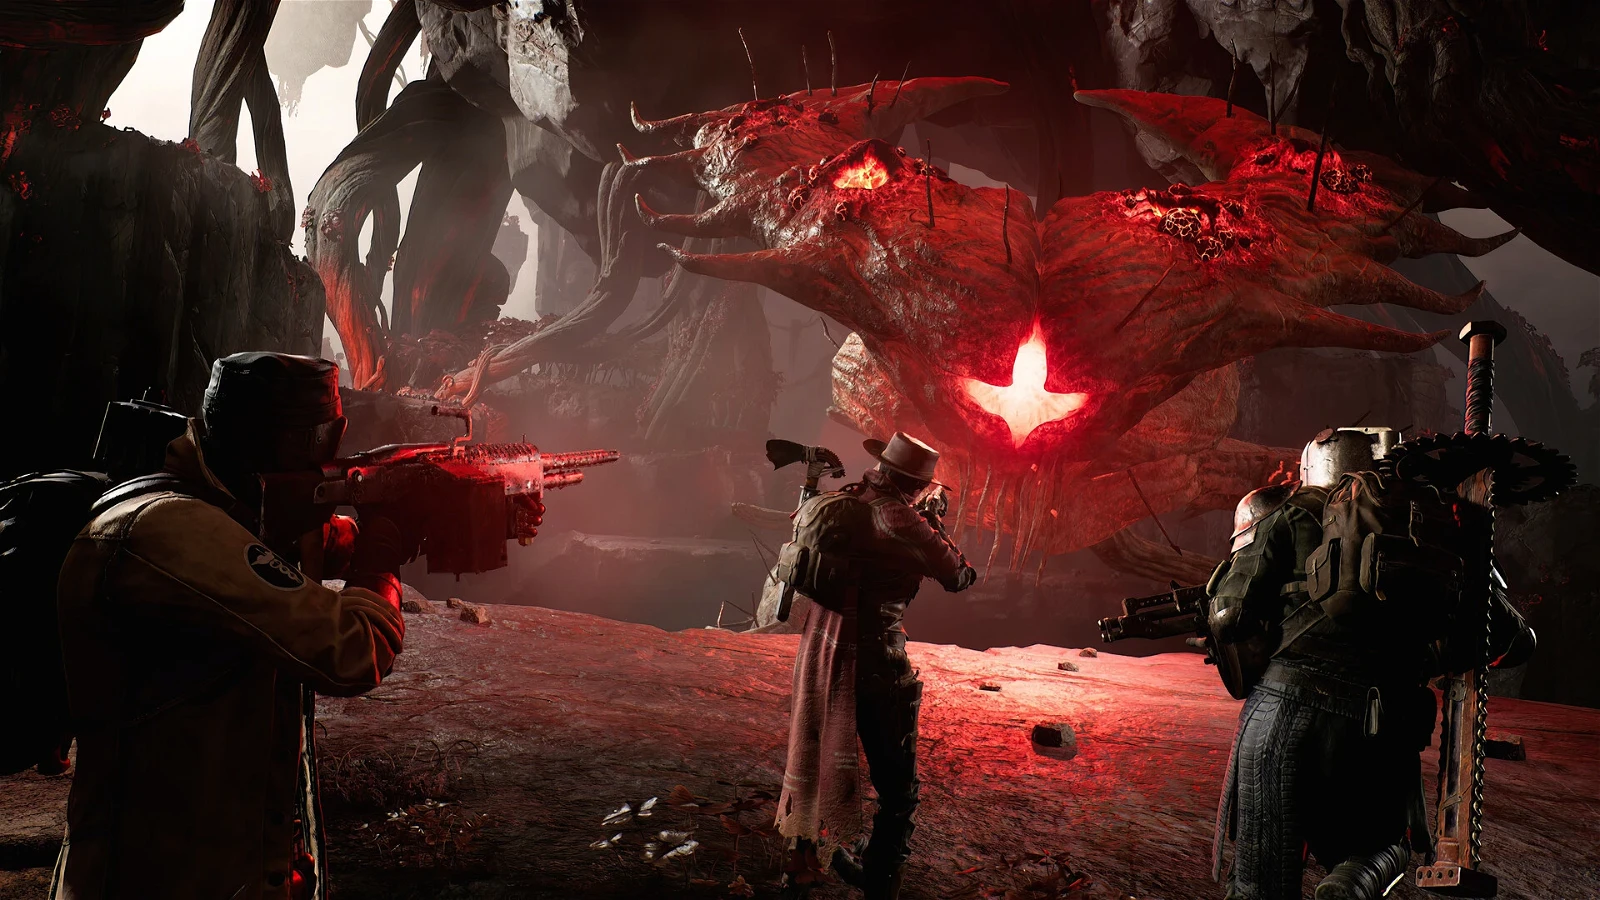 Remnant 2 will allow players to explore for more than 400 hours according to the principal designer. 